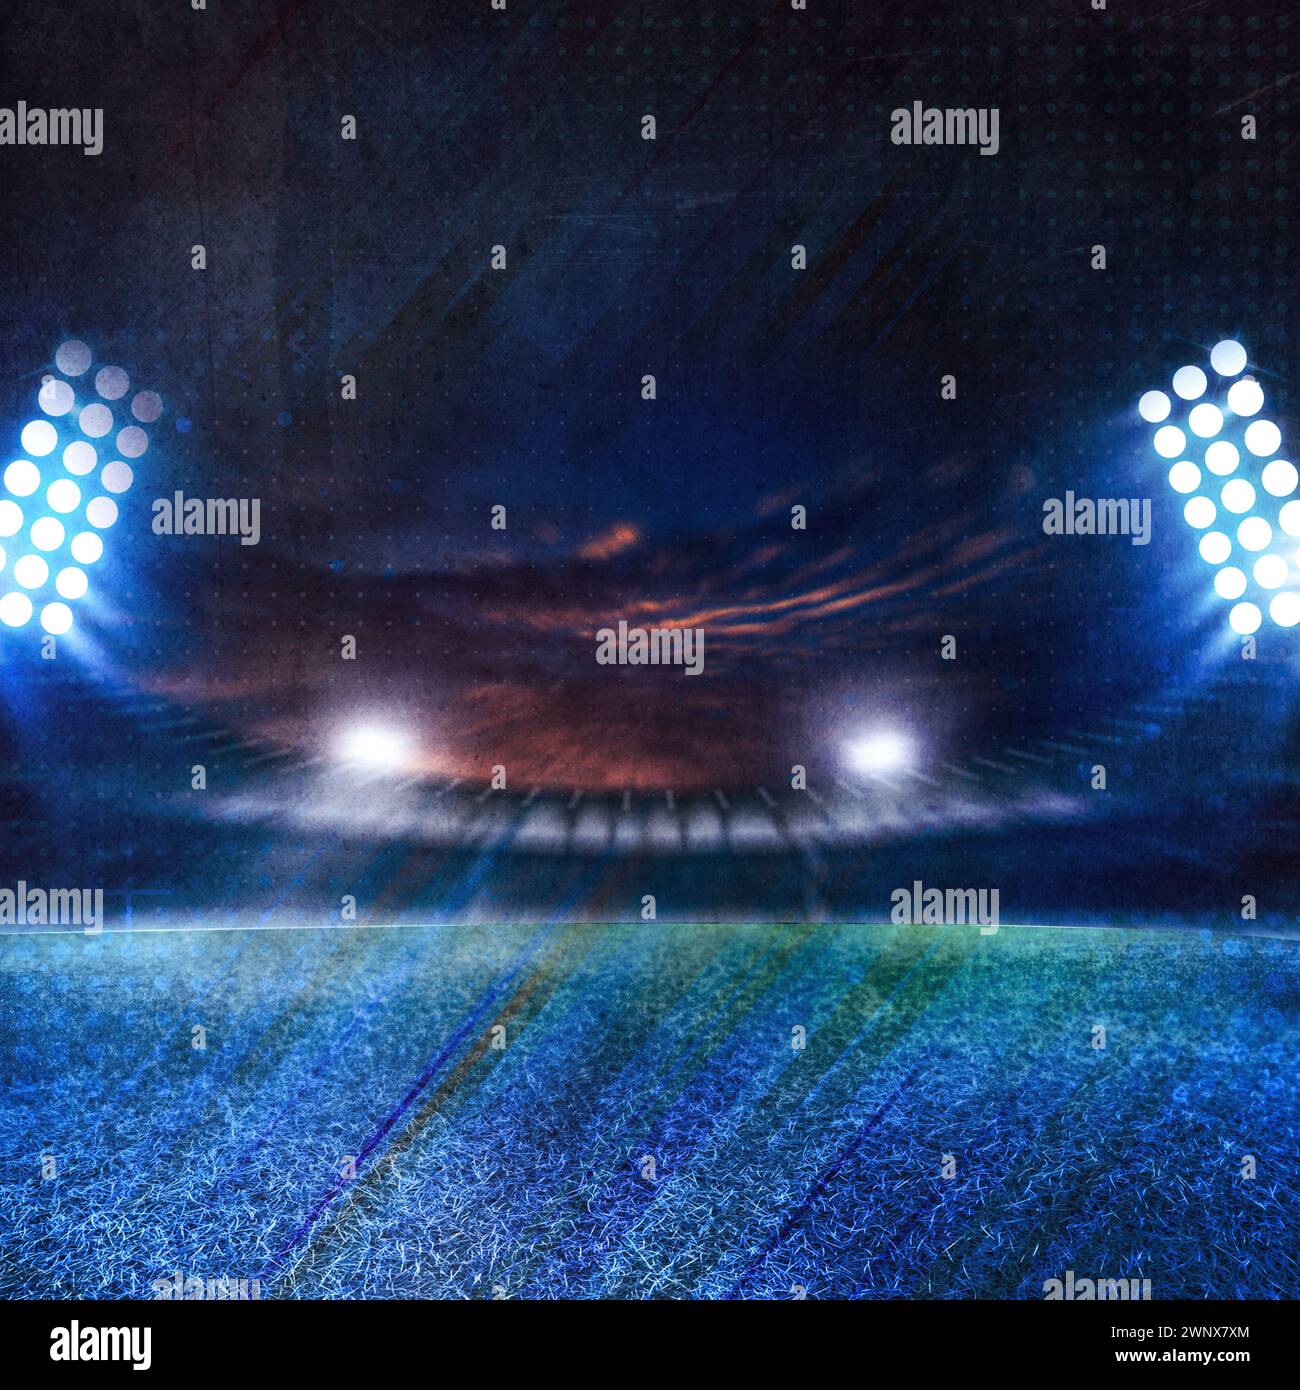 Cricket template for social media posts. Cricket background with stadium lights, gallery and field. Readymade background for sports social media. vs Stock Photo